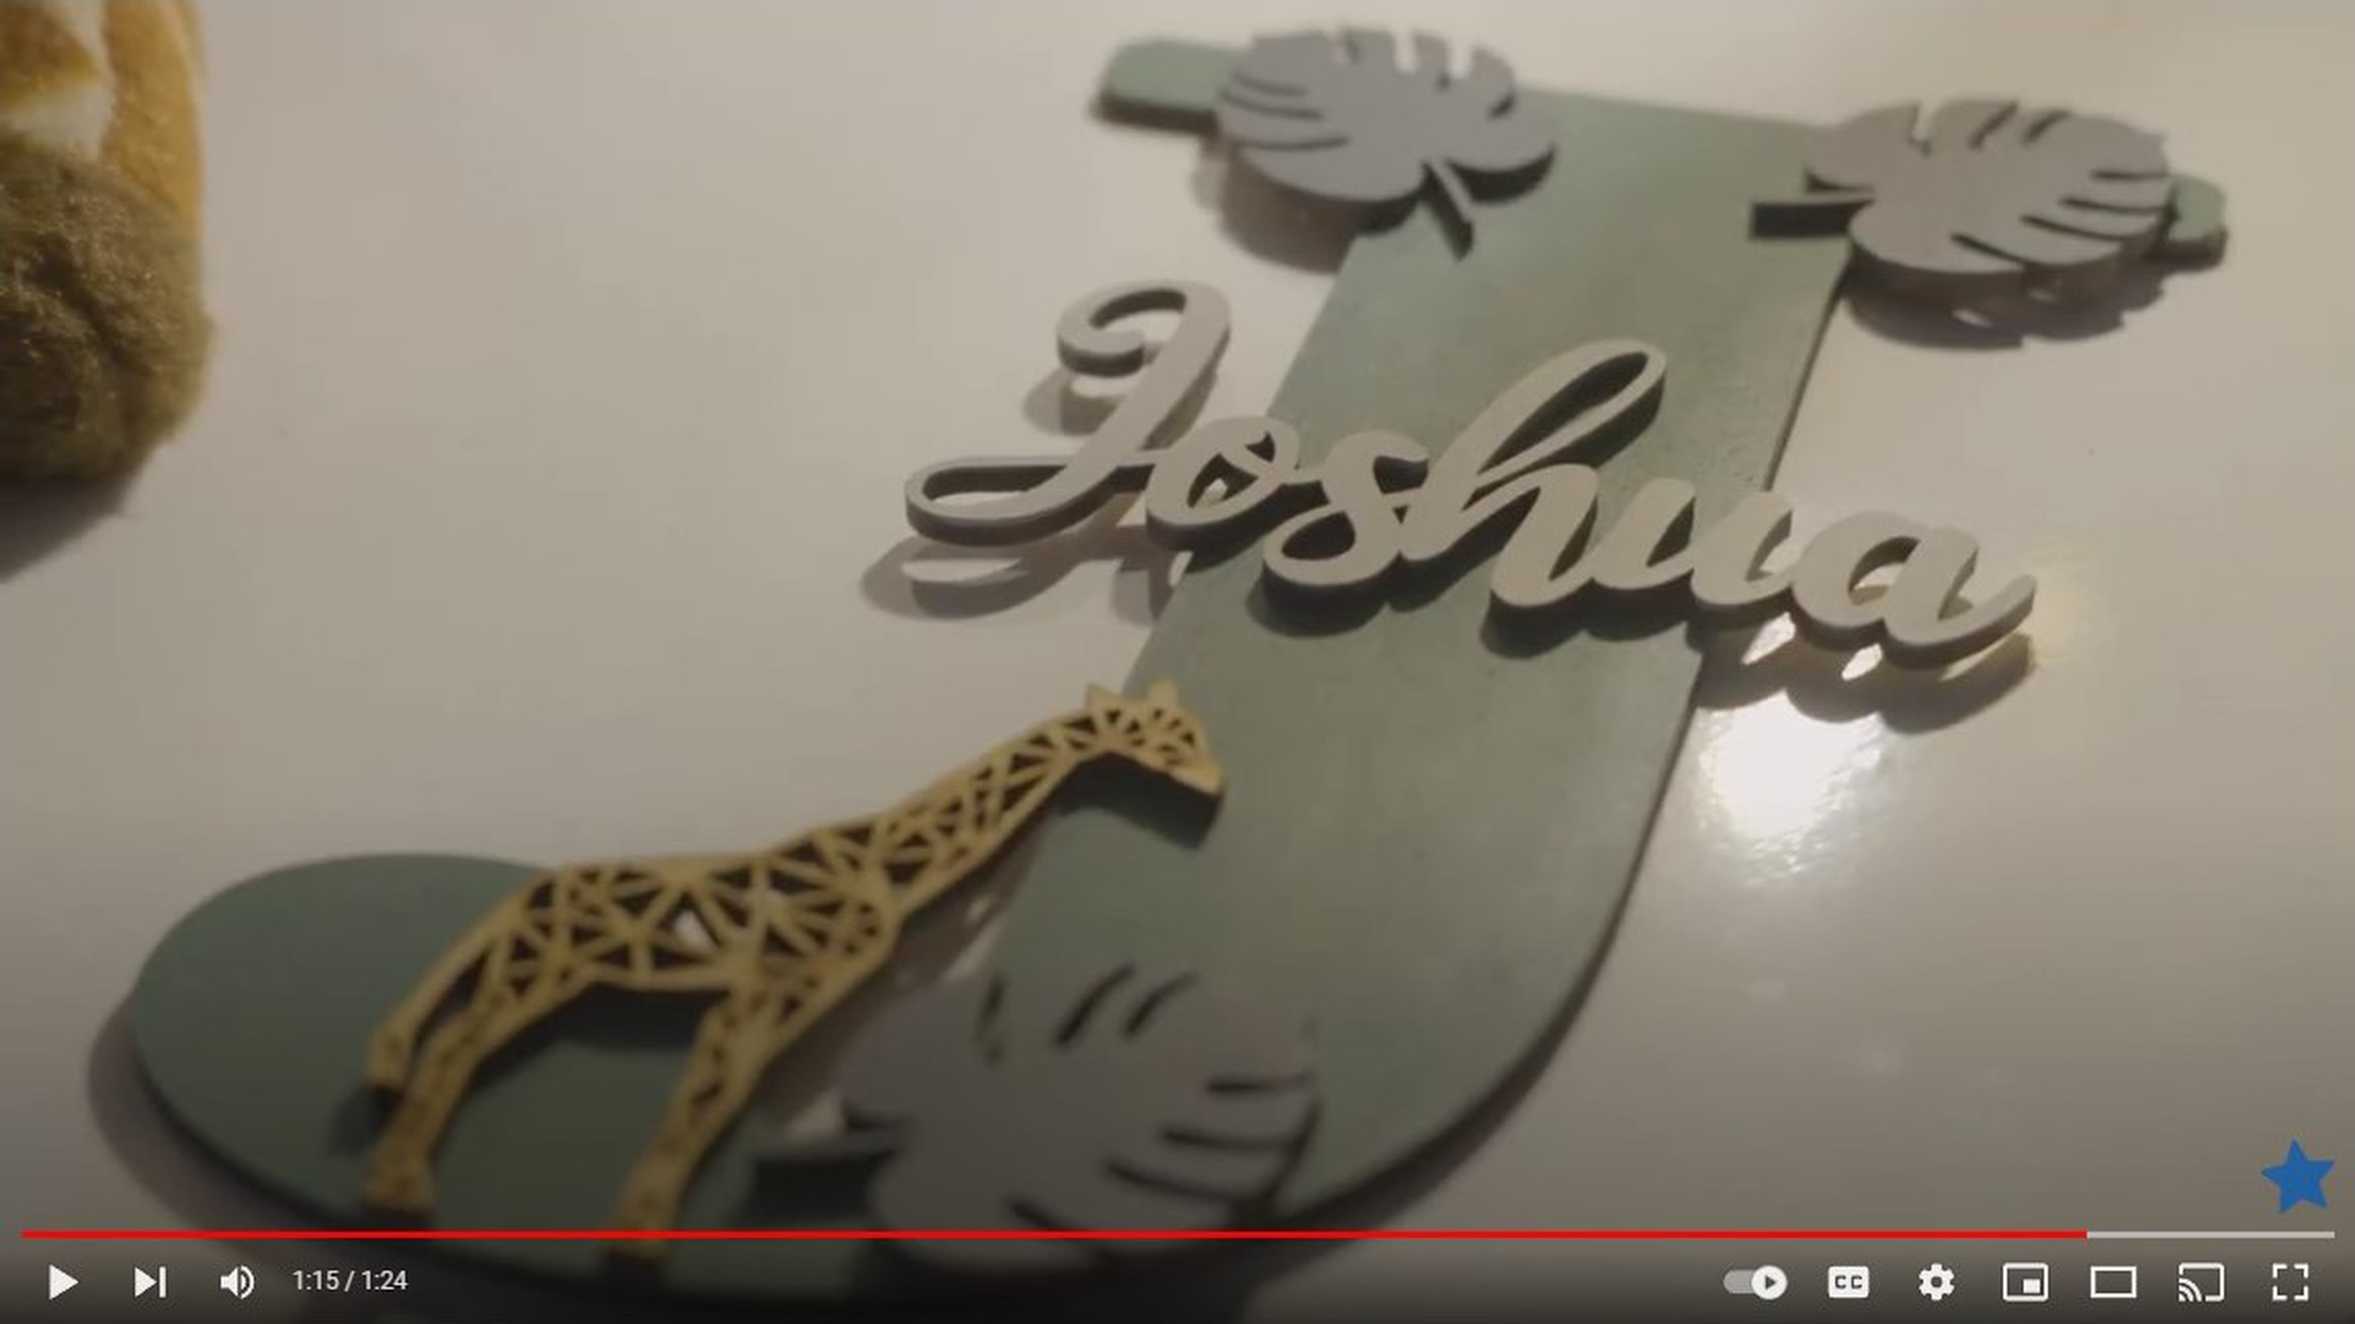 A still taken from the video of Joshua's wish, showing his carved nameplate on his bedroom door.